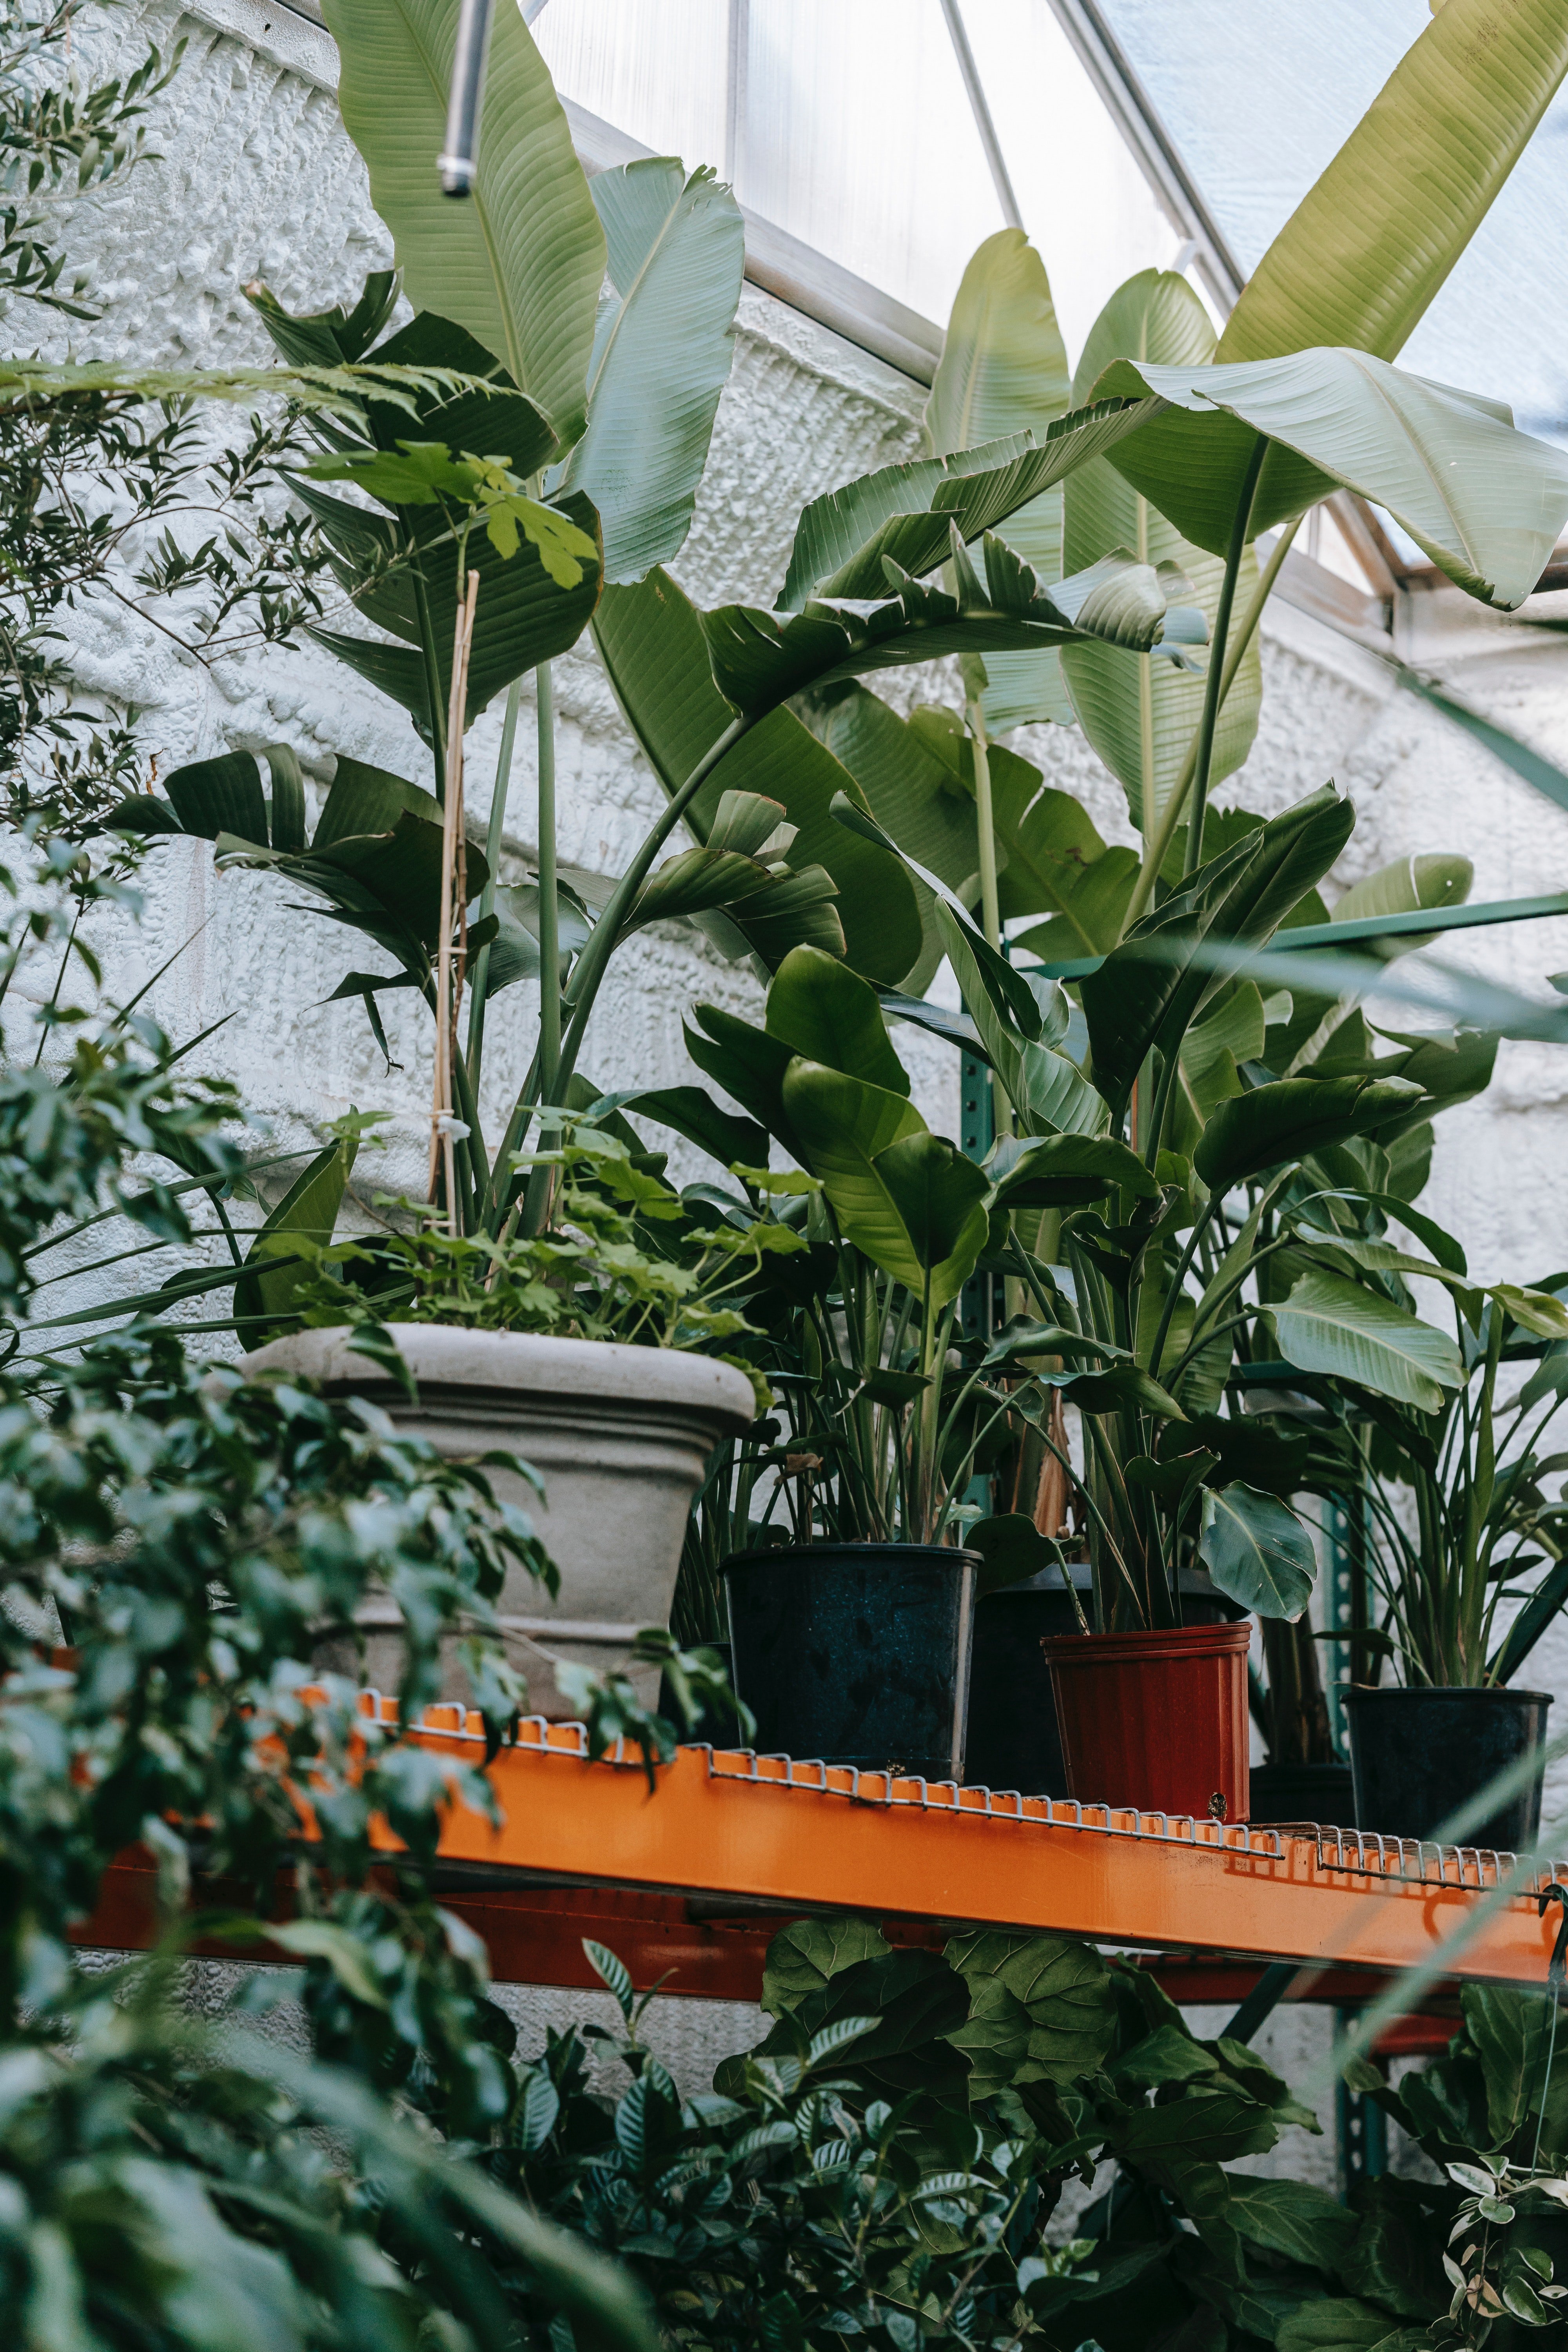 Tess lived in an abandoned hothouse. | Source: Pexels